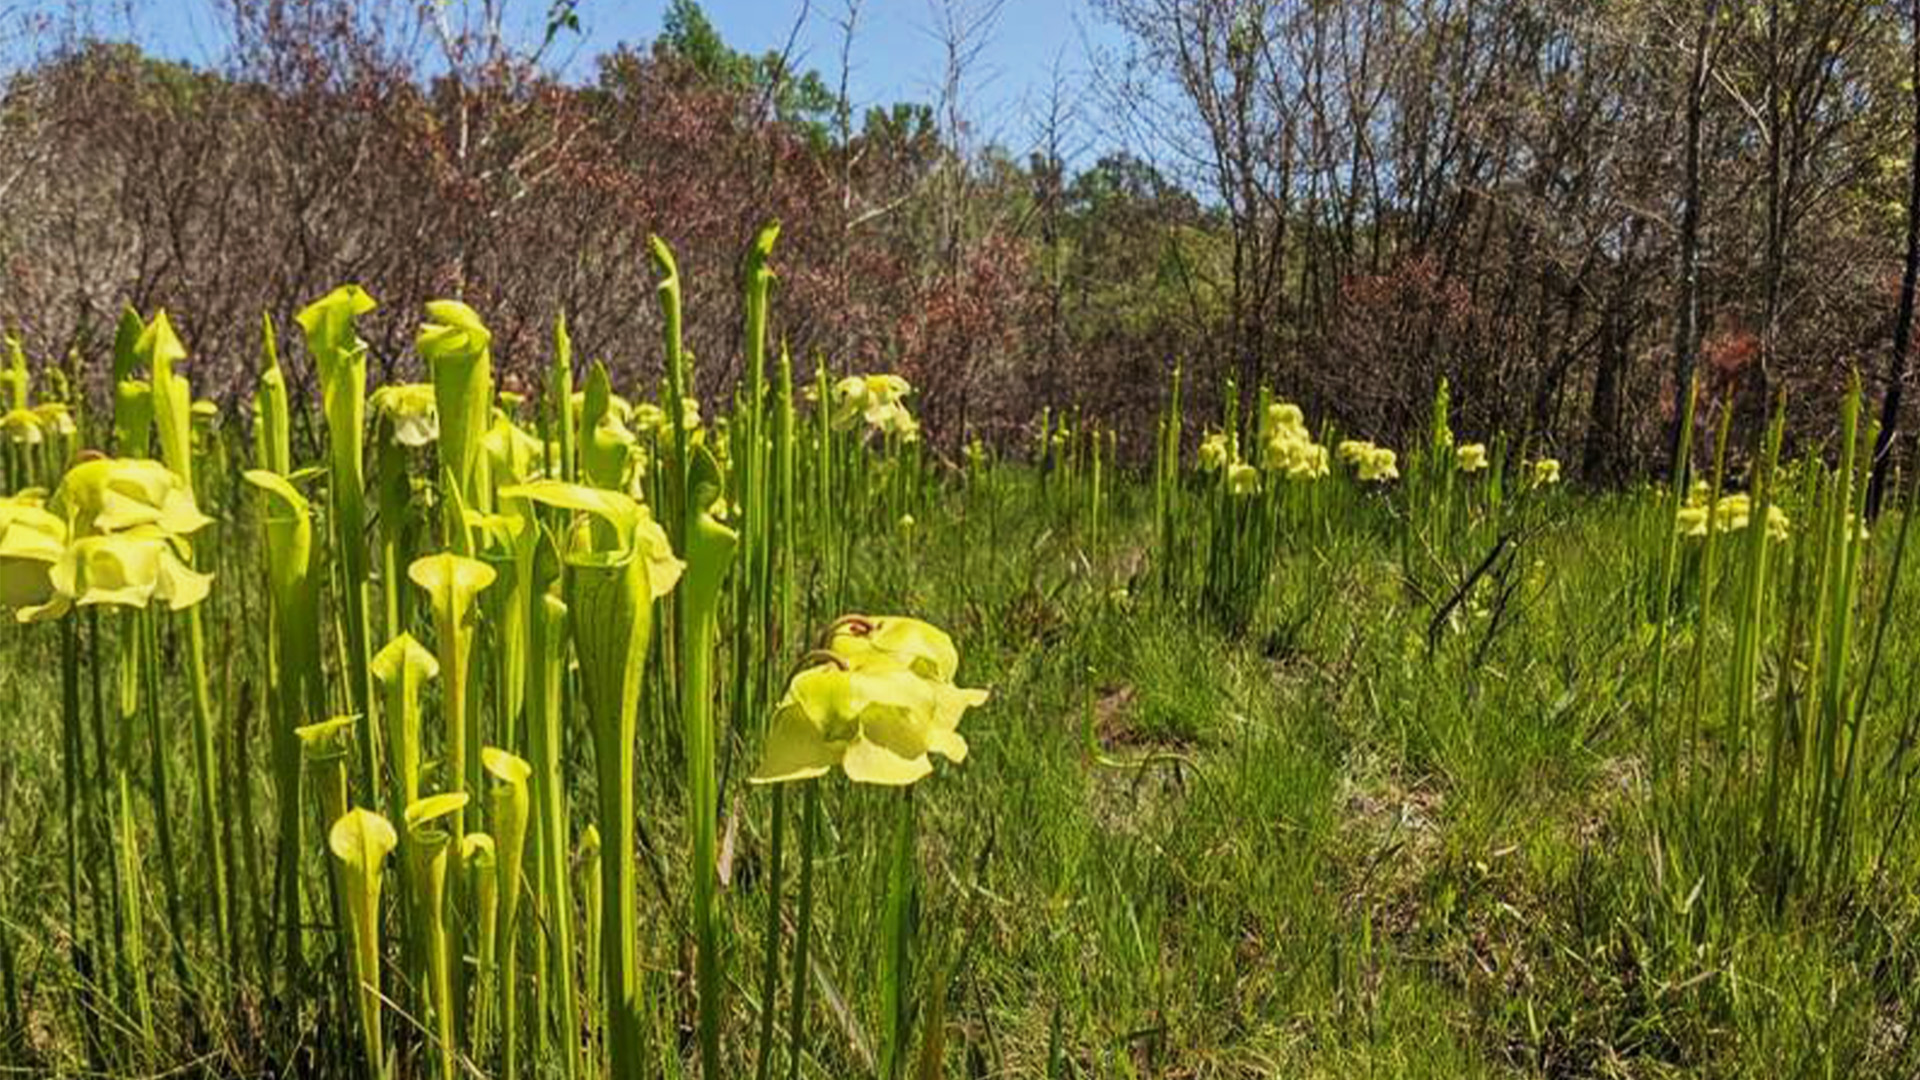 Helping Locals “Meat” Their Native Carnivorous Plants 